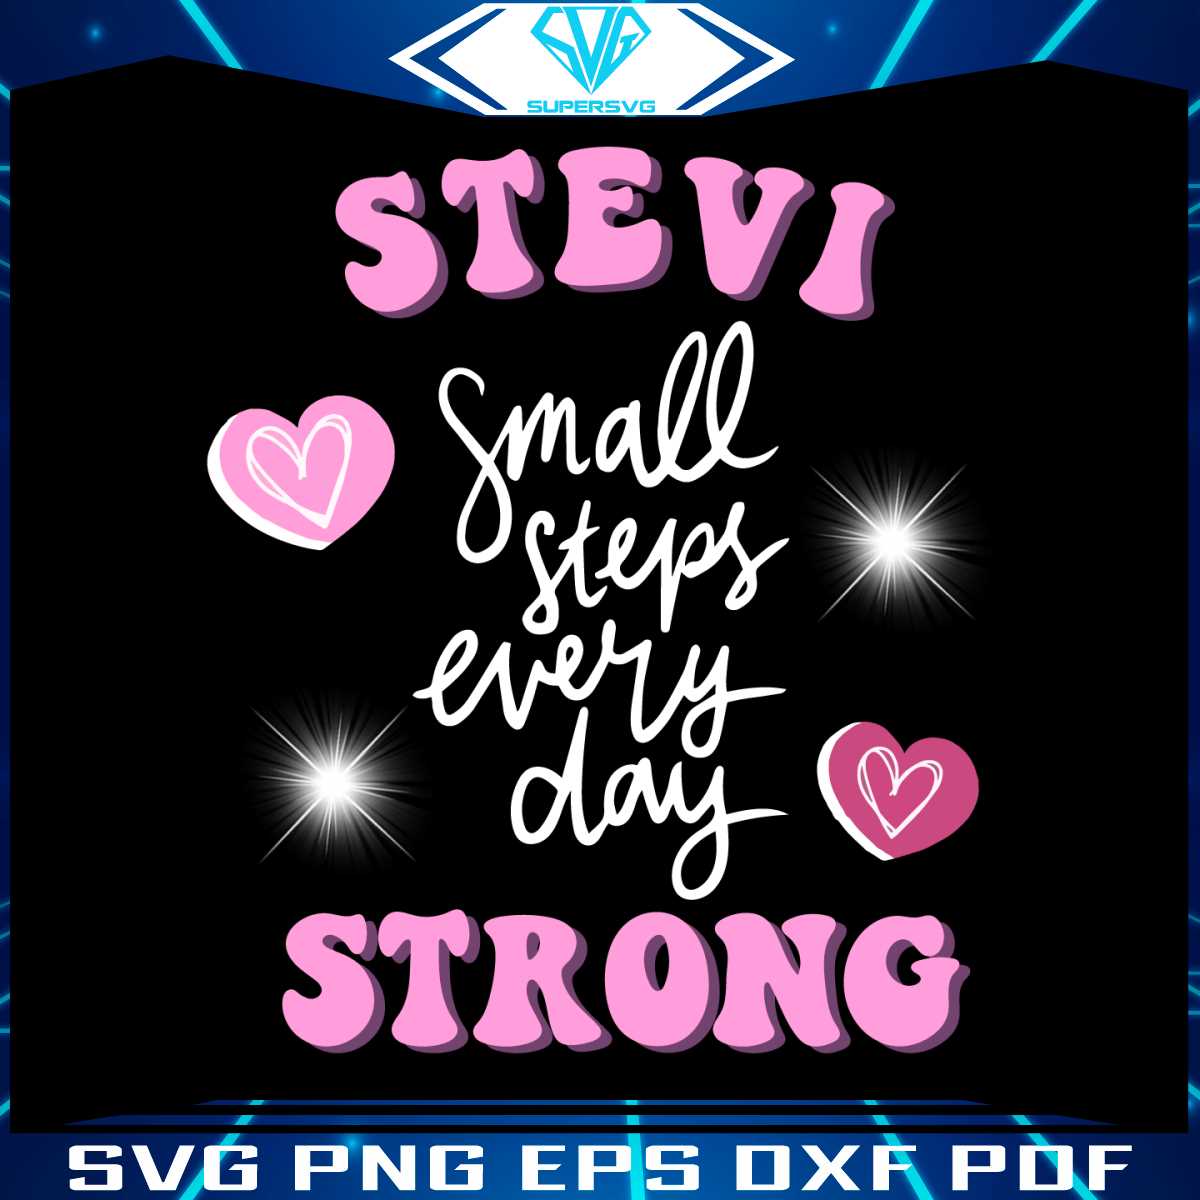 stevi-strong-small-step-everyday-png